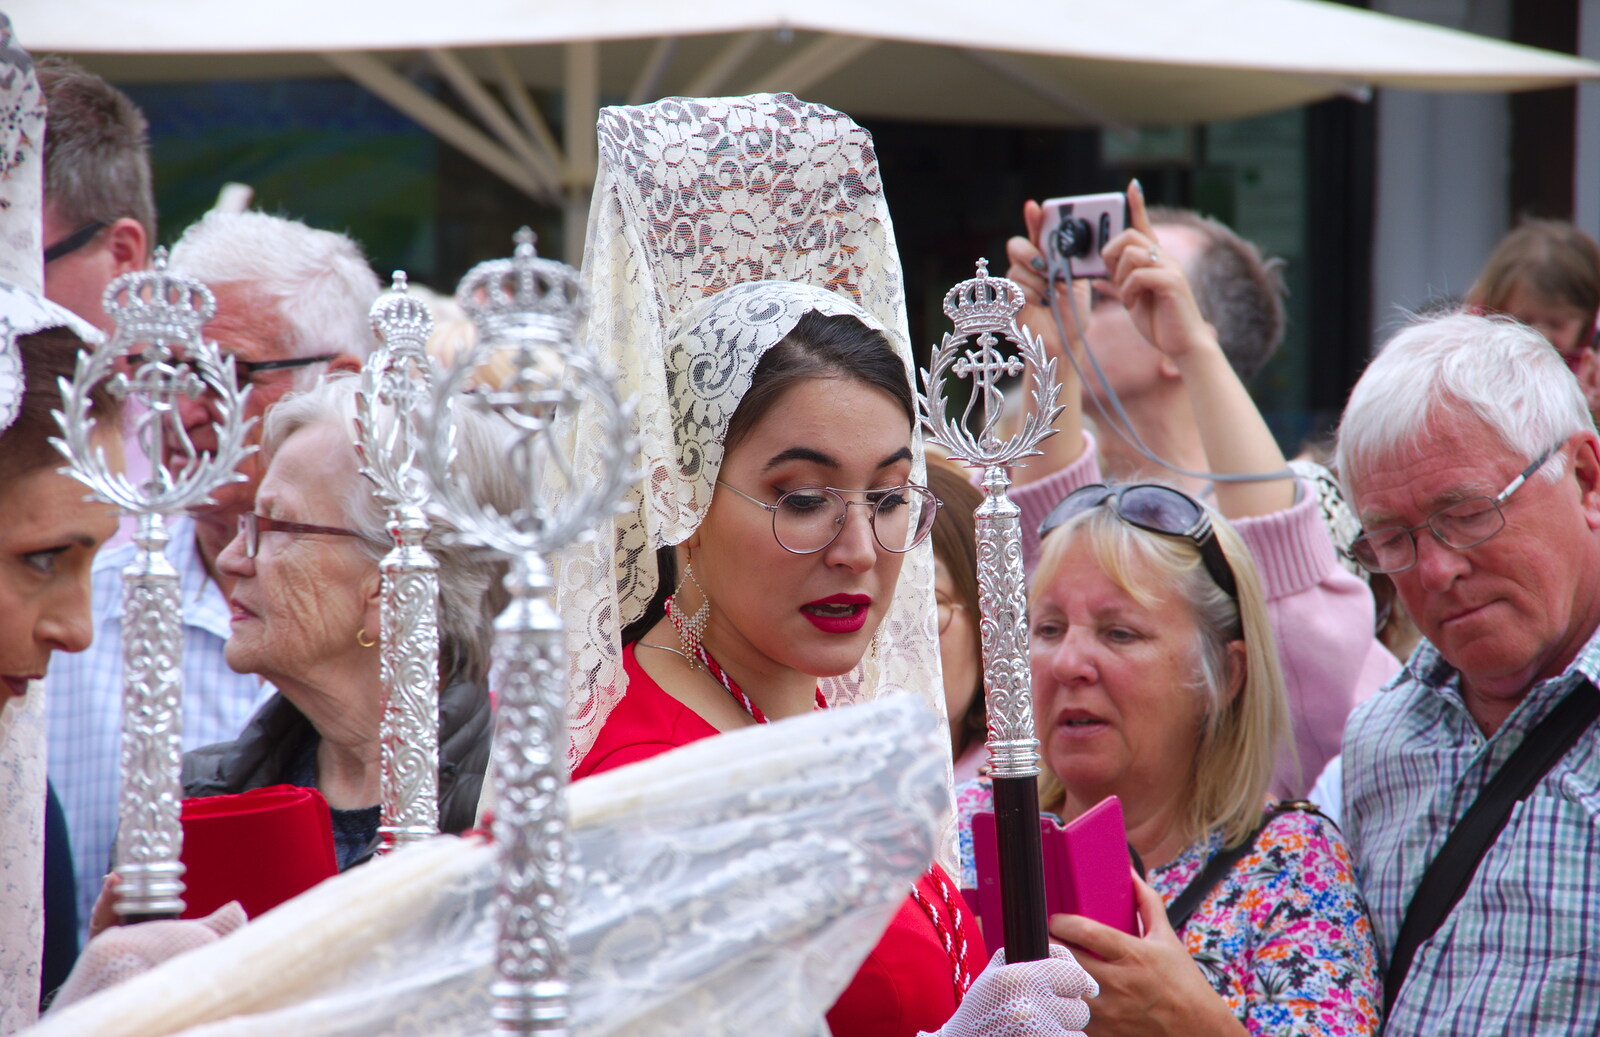 Another veiled woman from An Easter Parade, Nerja, Andalusia, Spain - 21st April 2019